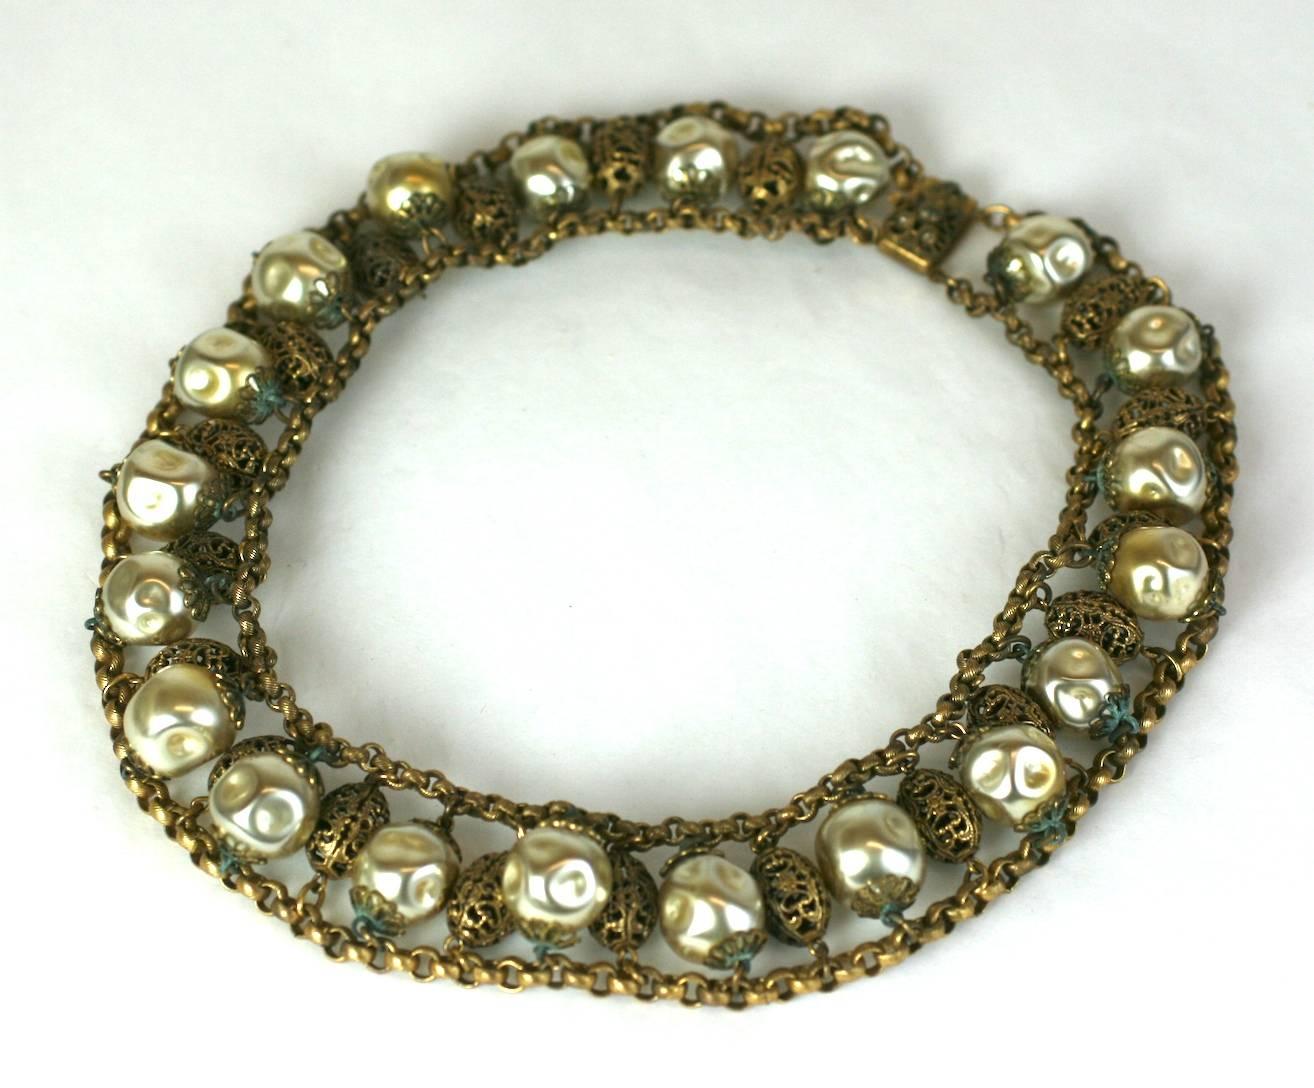 Striking, oversized Pearl and Gilt filigreed metal Czech Collar from the 1930's. Hammered finish, hollow glass faux pearls are spaced between gilt filigree beads set on chain. 1930's Czech. 
Excellent Condition.
Length 17"
Width 1 1/8"